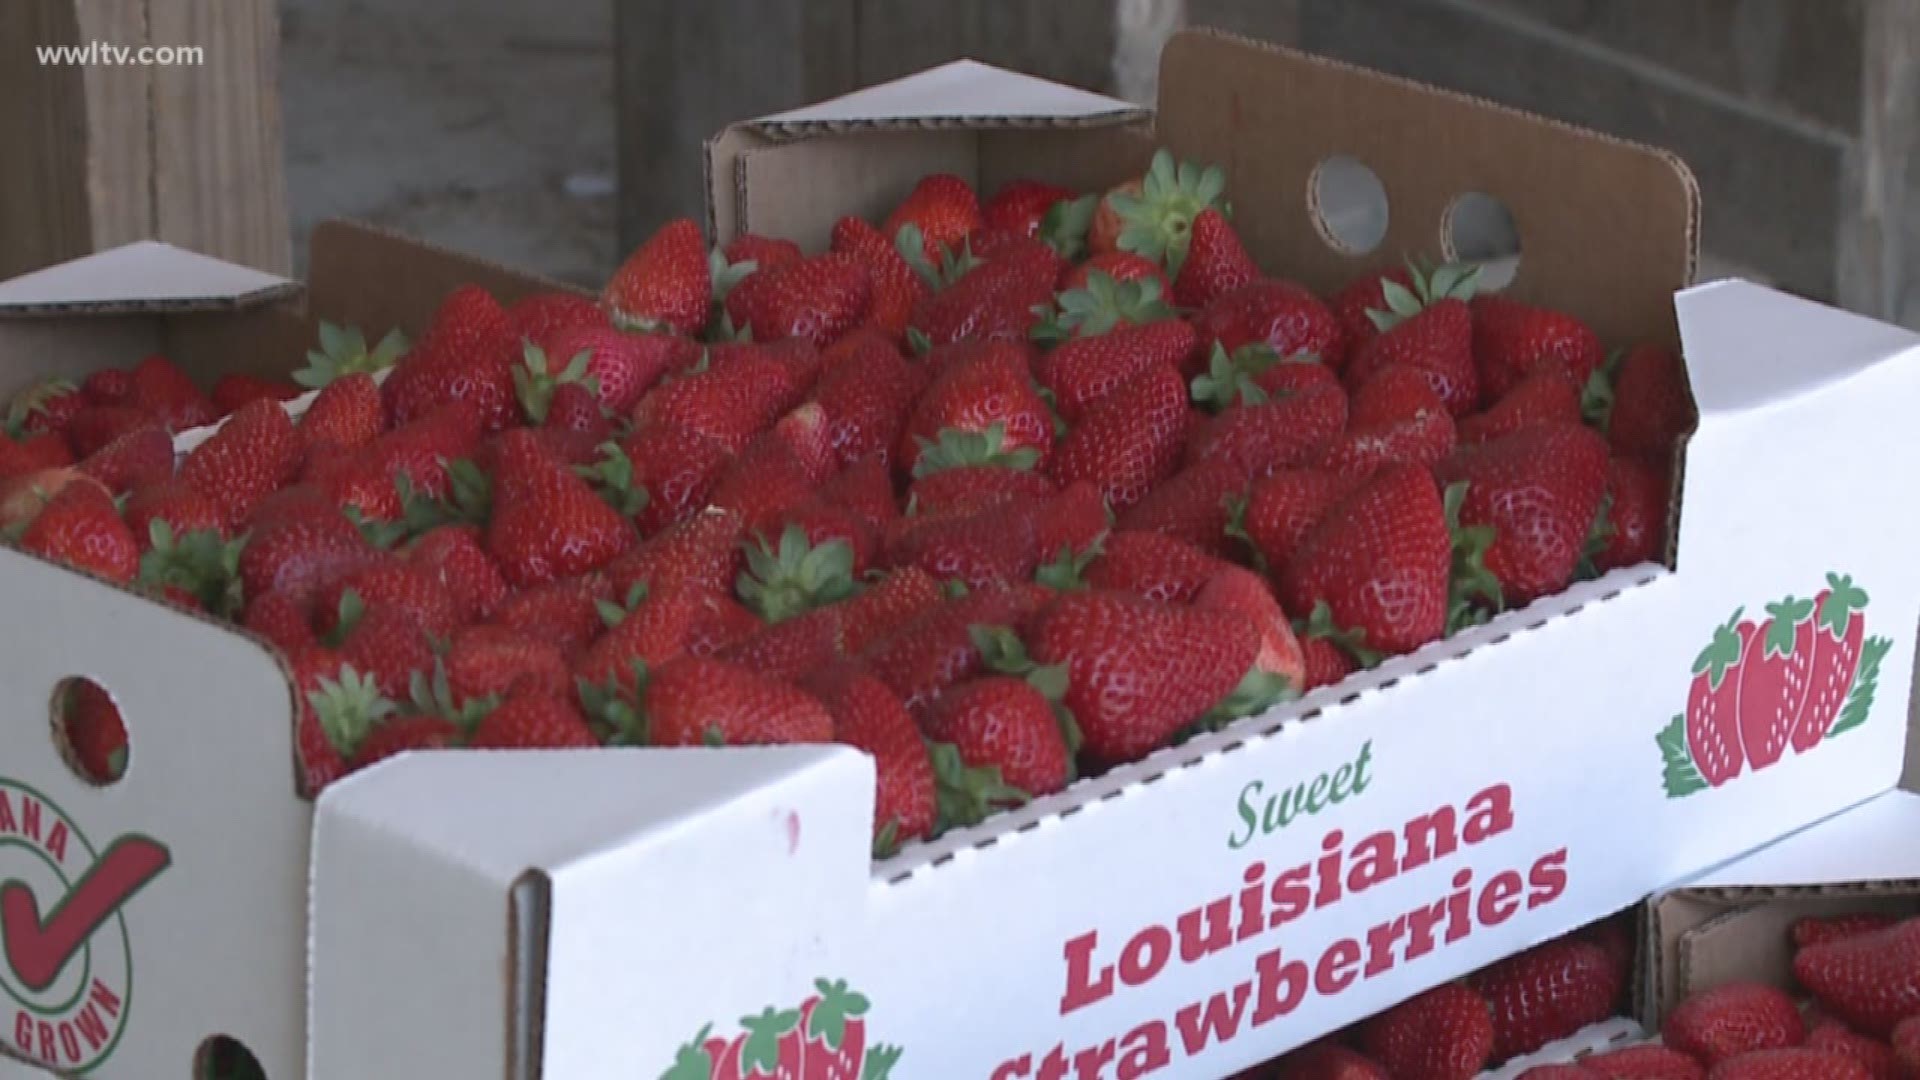 Access Code 70454 - exploring Ponchatoula - the 'Strawberry Capital of the World'